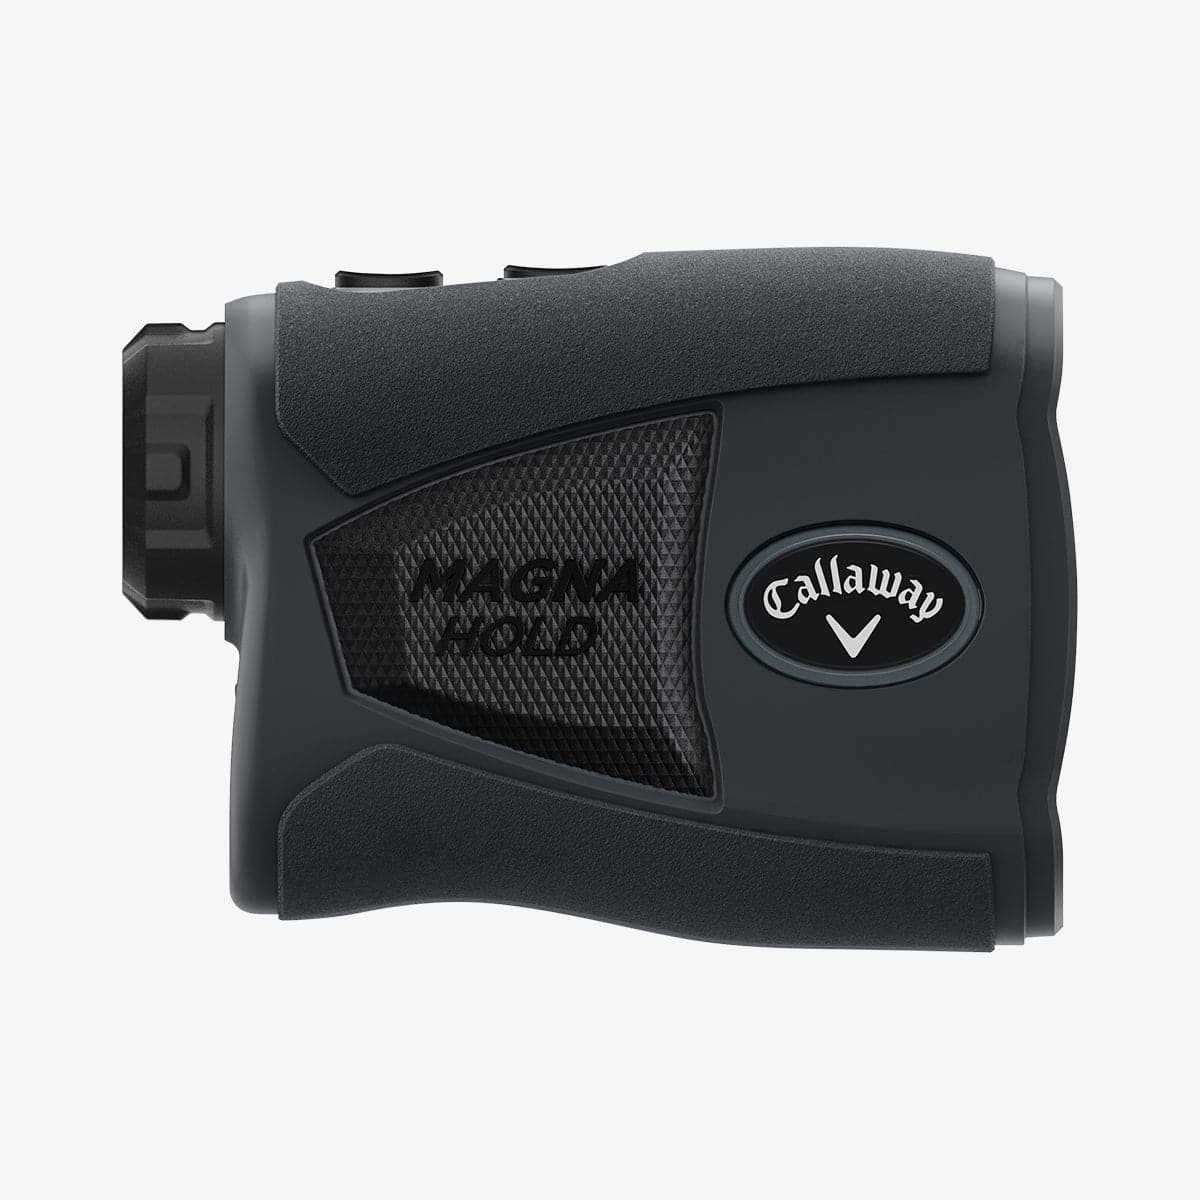 ACS03791 - Callaway 300 Pro Laser Rangefinder Case Liquid Air in charcoal showing the side